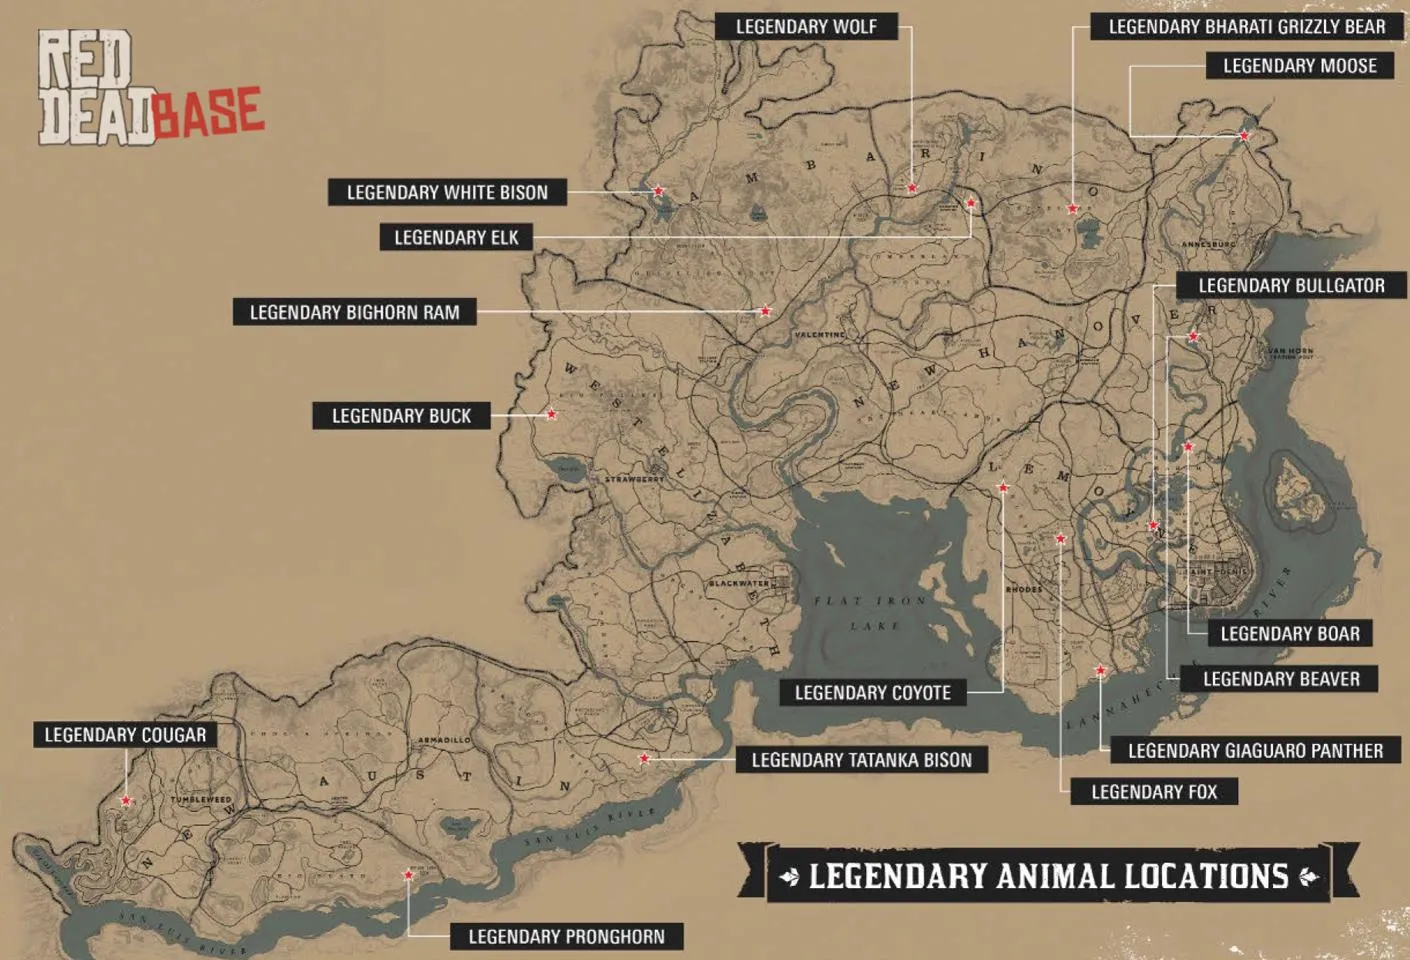 Legendary Wolf - Map Location in RDR2